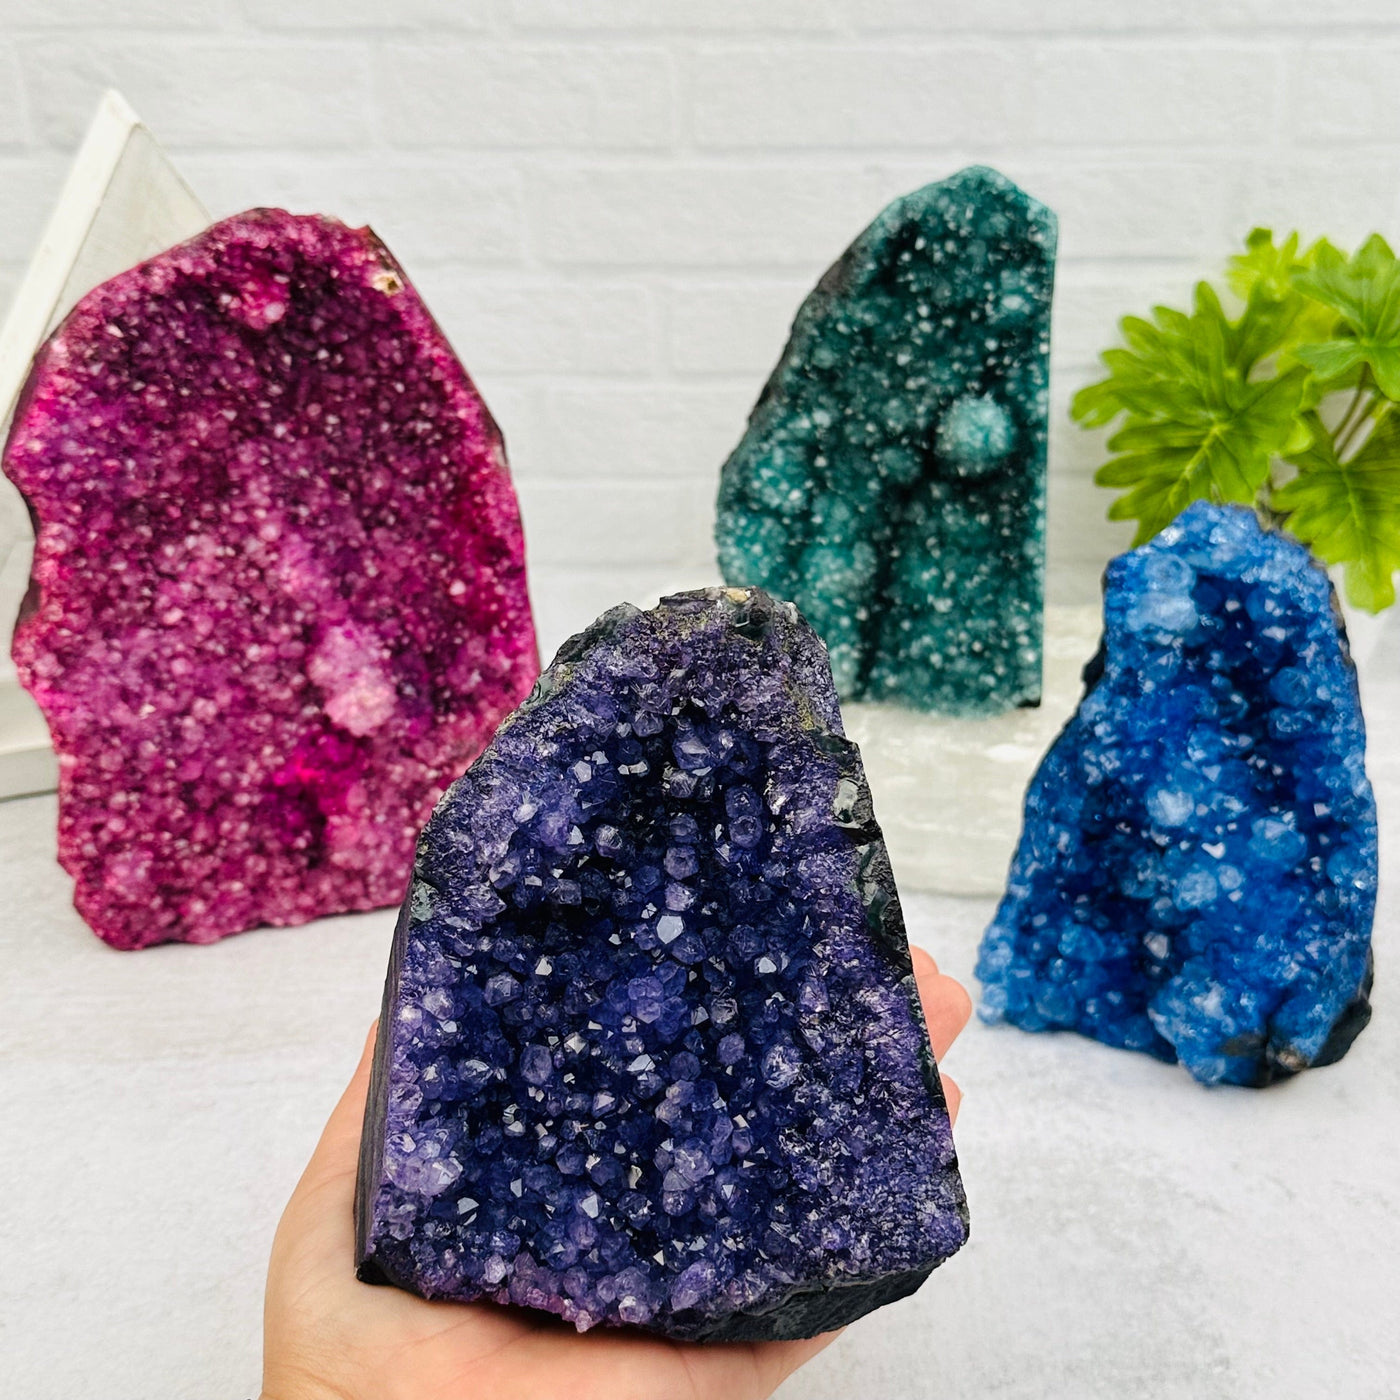 Amethyst Crystal Cluster CutBase - Colorful Dyed Crystal Cut Base in hand for size reference  